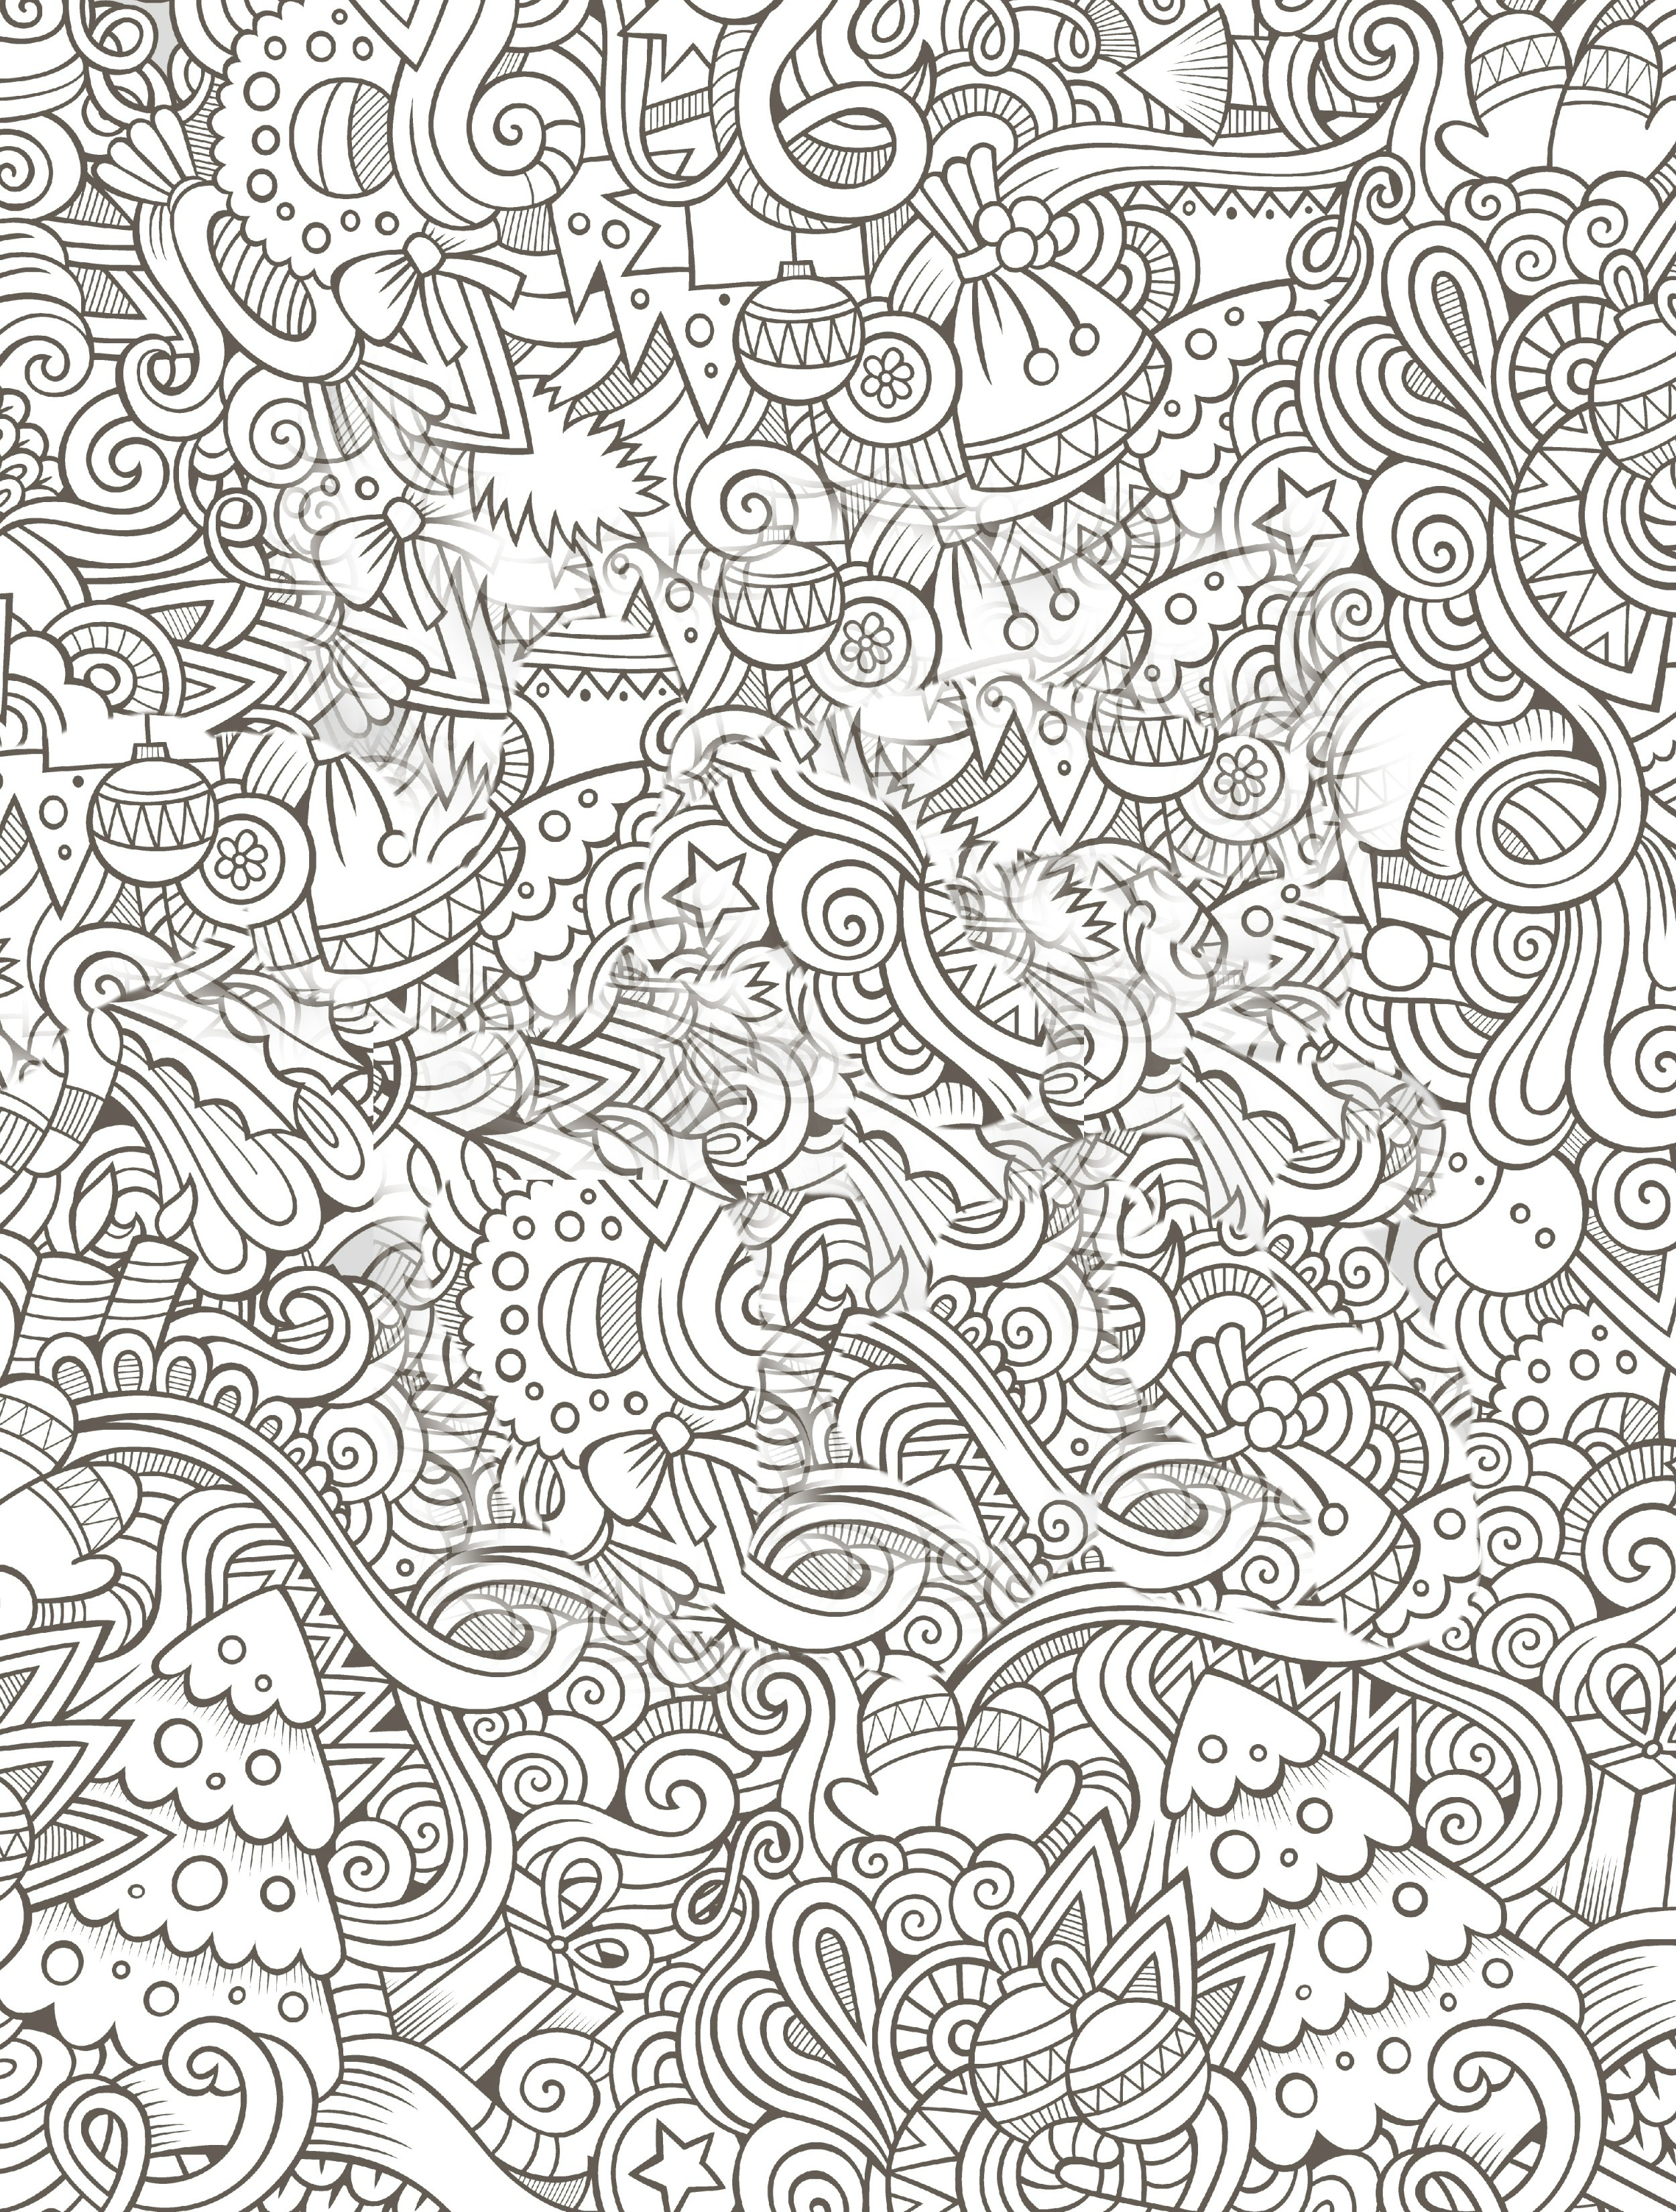 10 Free Printable Holiday Adult Coloring Pages - Free Printable Holiday Coloring Pages